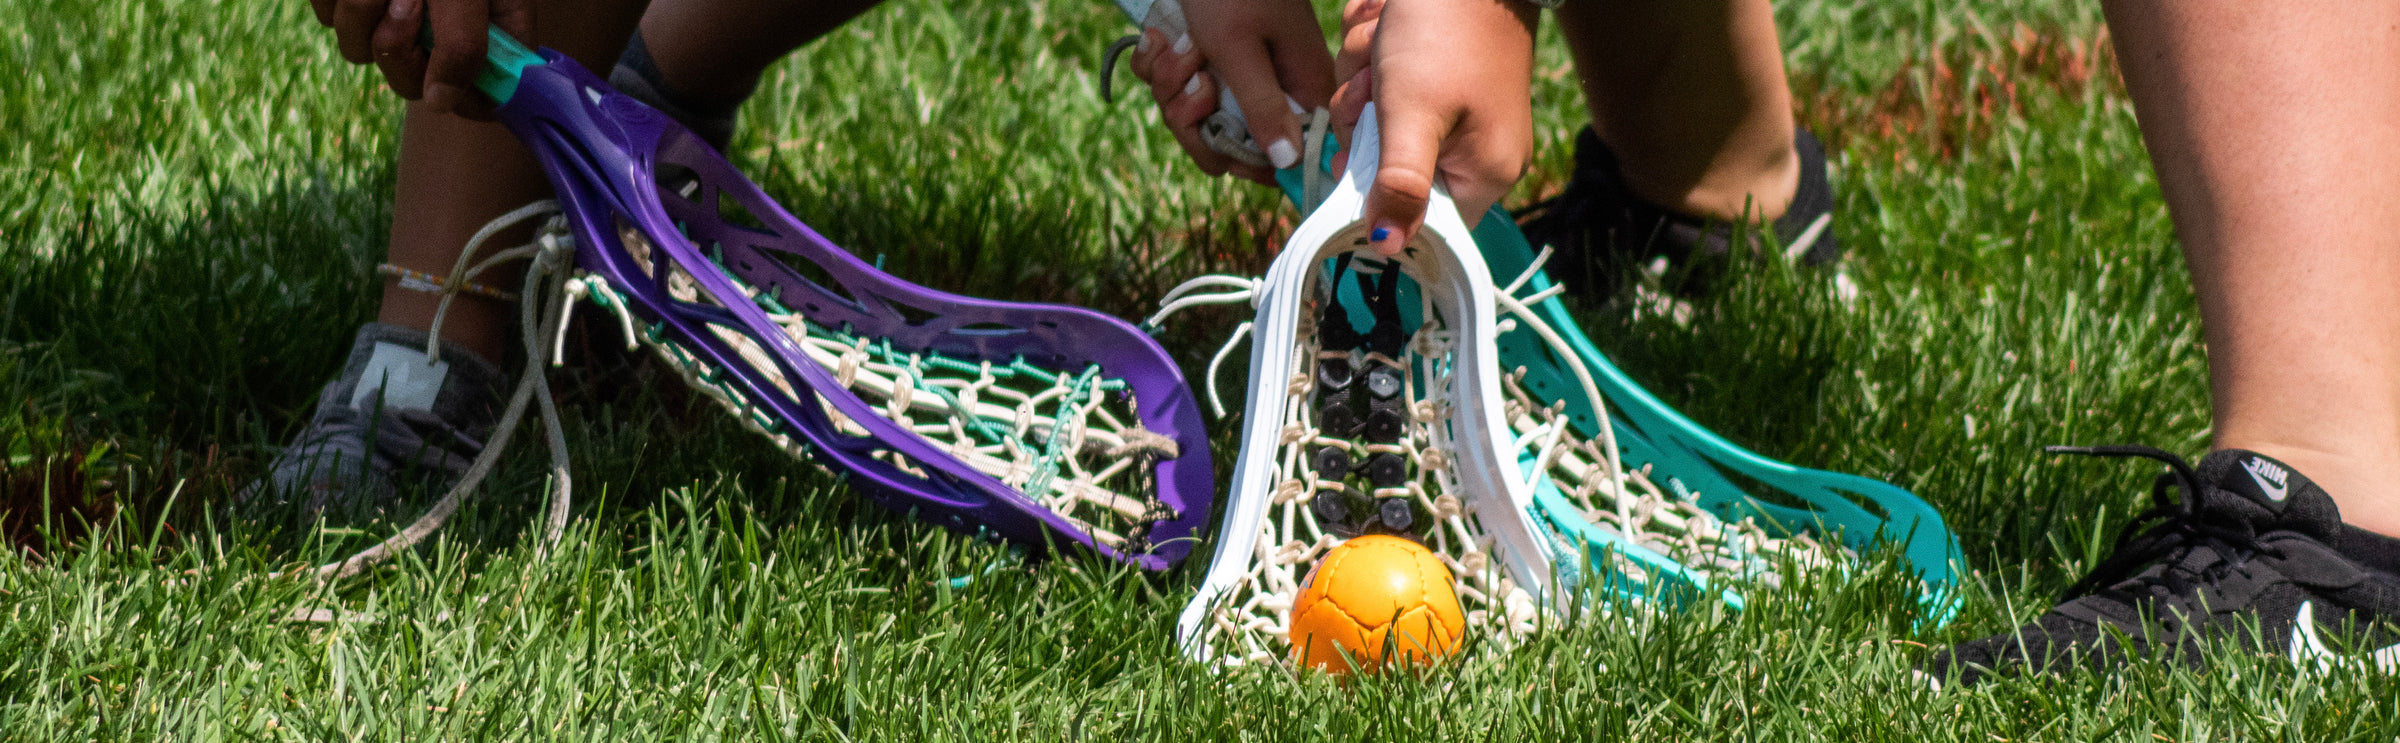 Lacrosse players scooping a Swax Lax practice ball while doing lacrosse drills